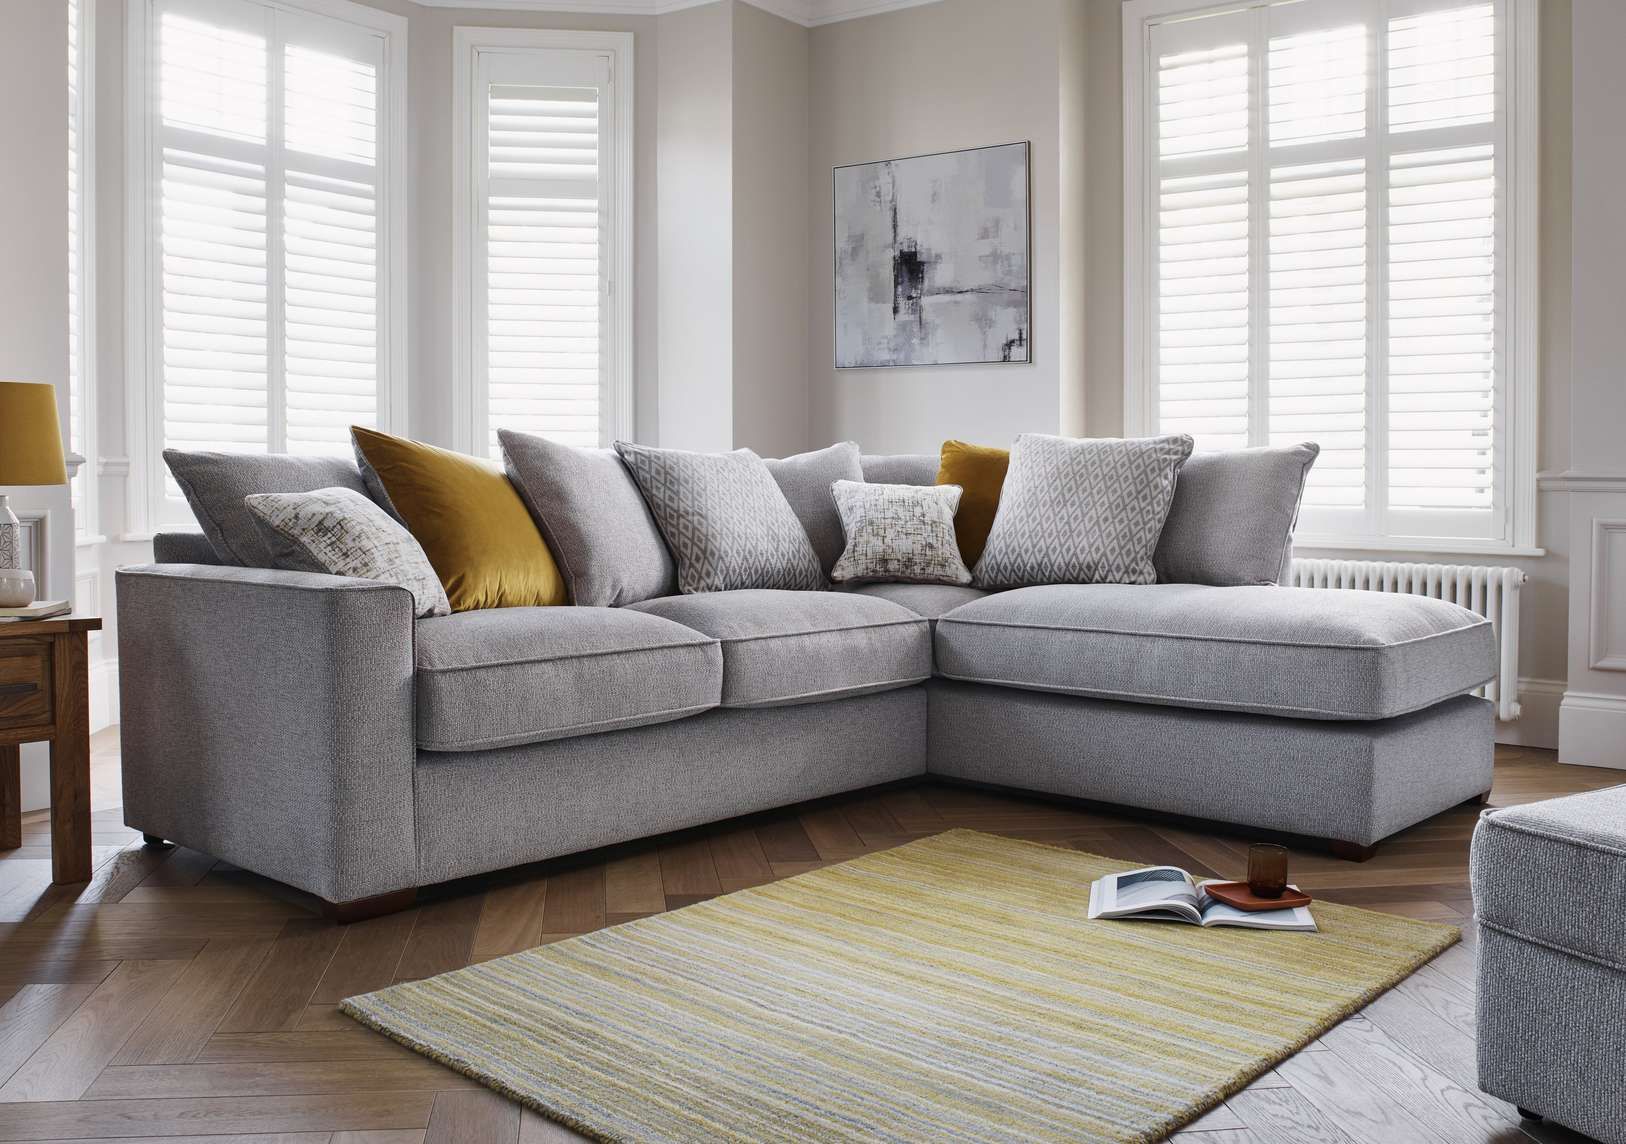 High quality Fabric Sofas For Small Living Rooms